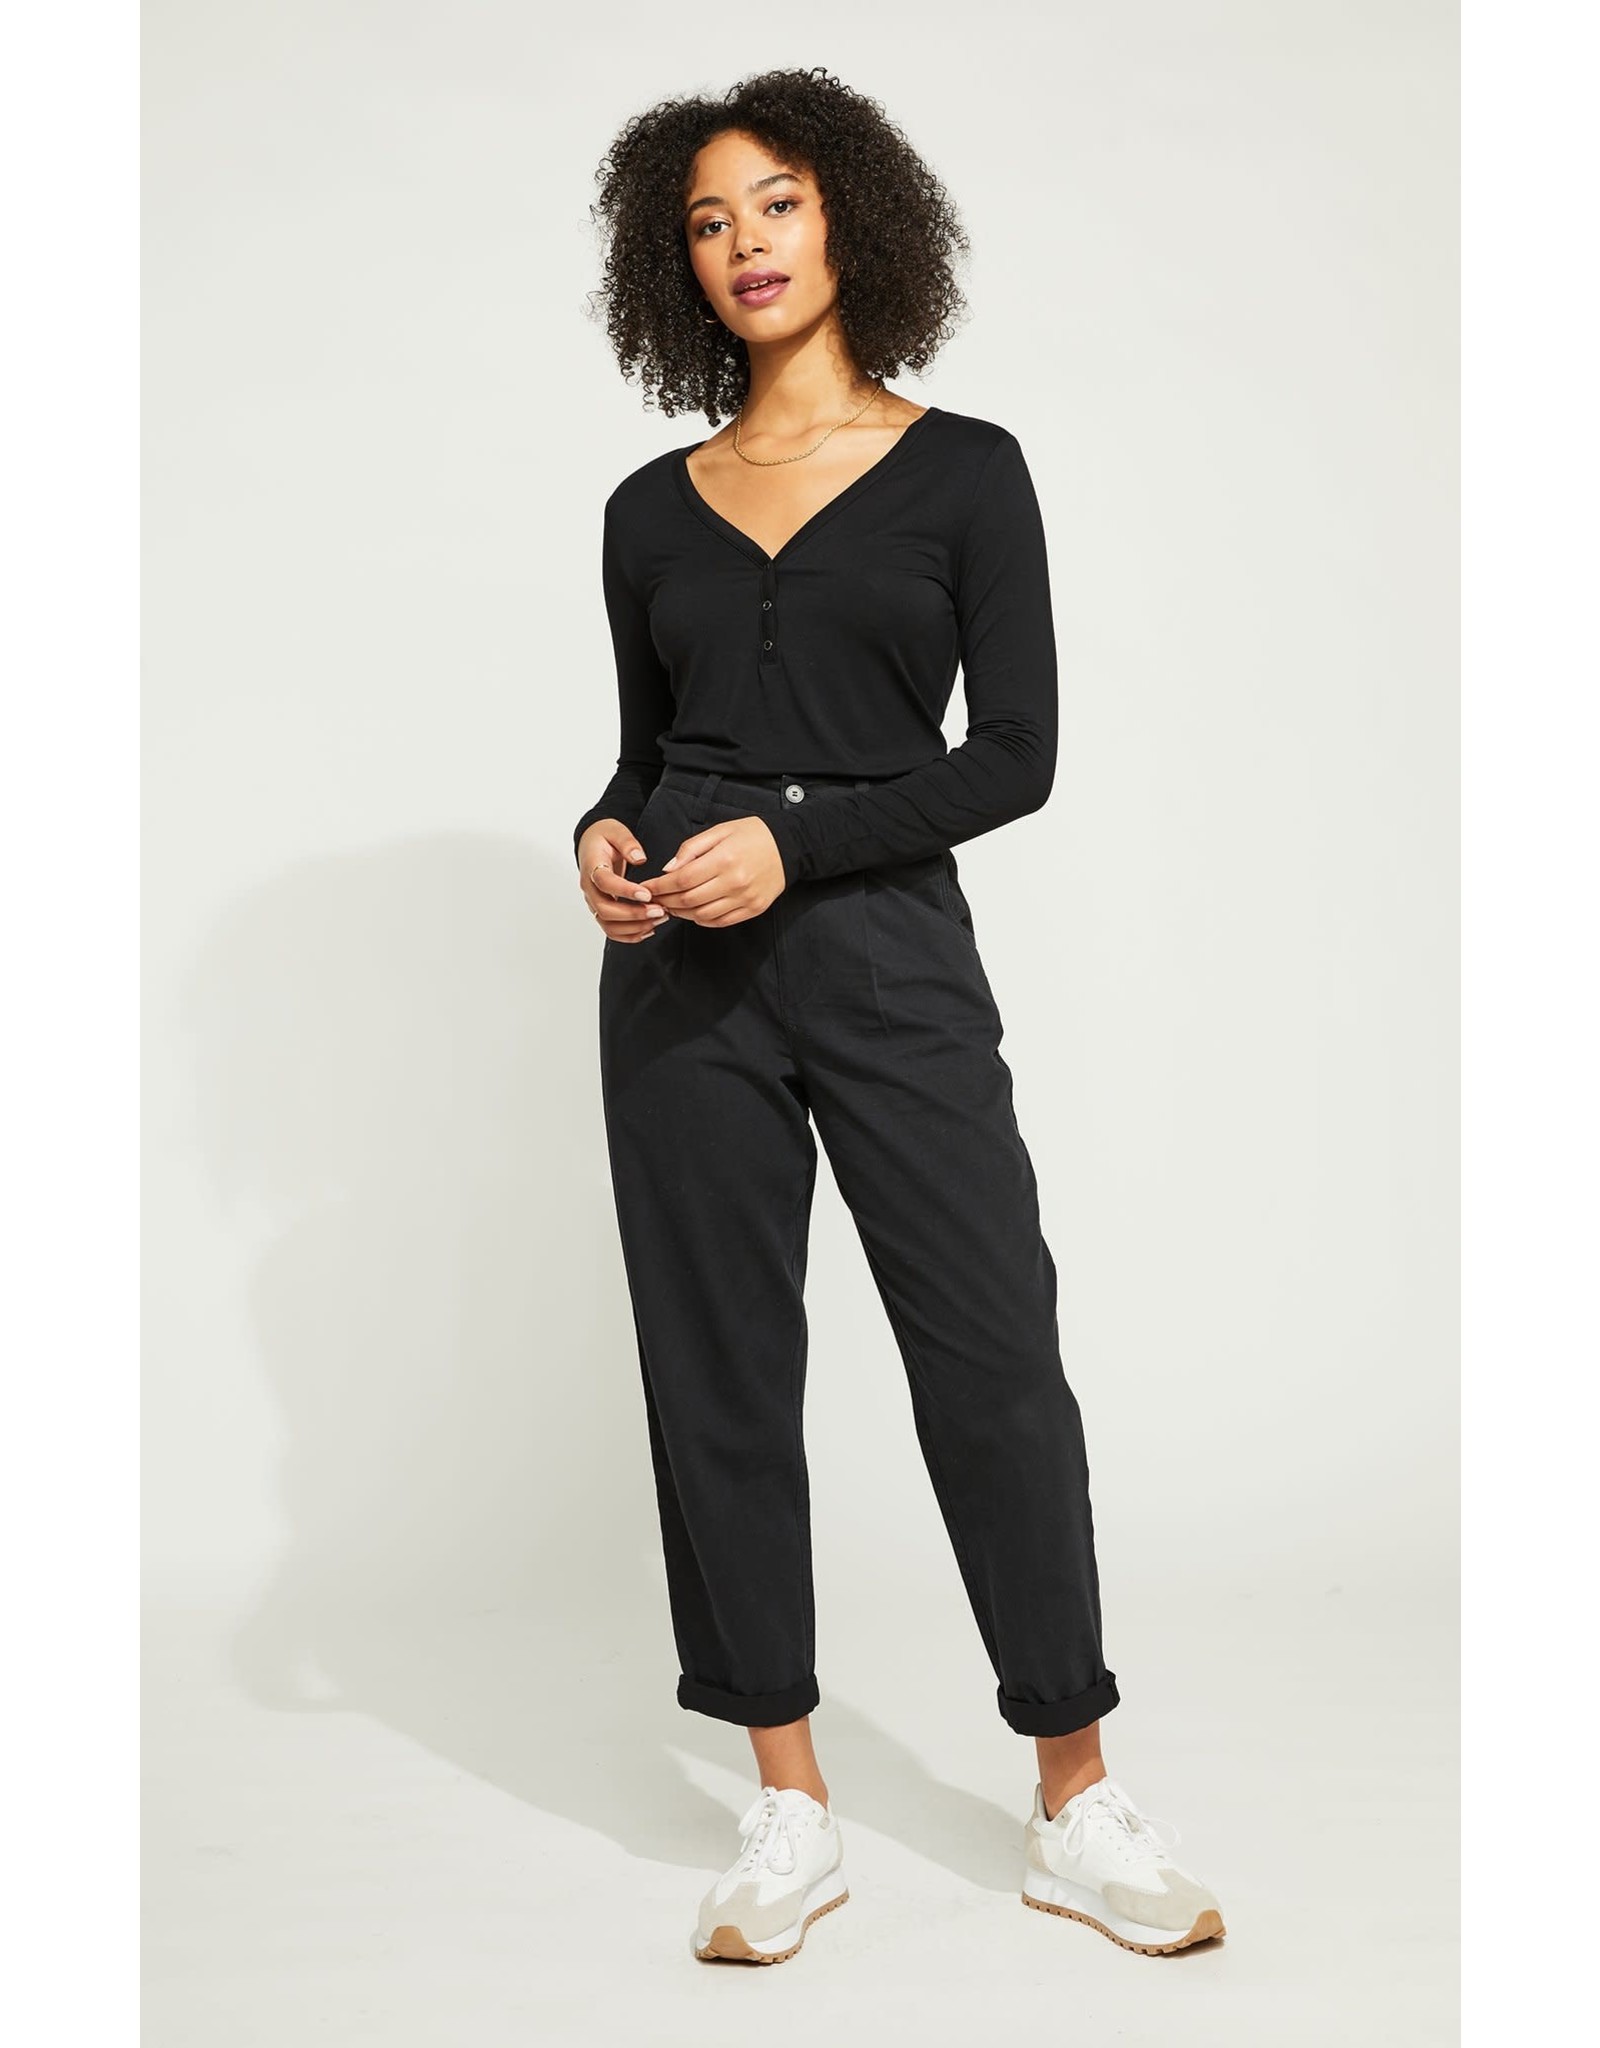 Gentle Fawn - Manchester Pant Black or Brown